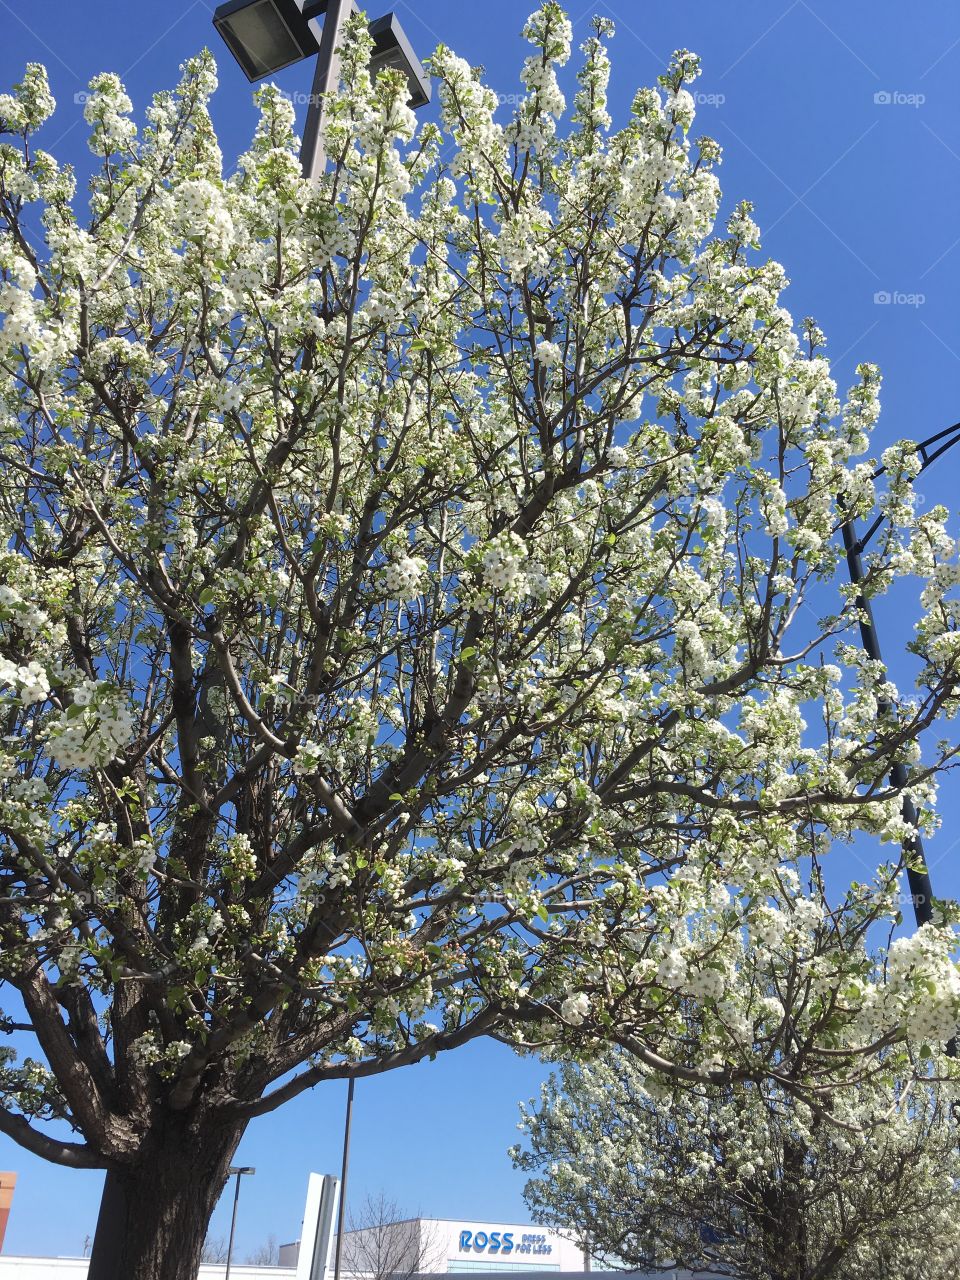 Blooms on tree on a sunny day 